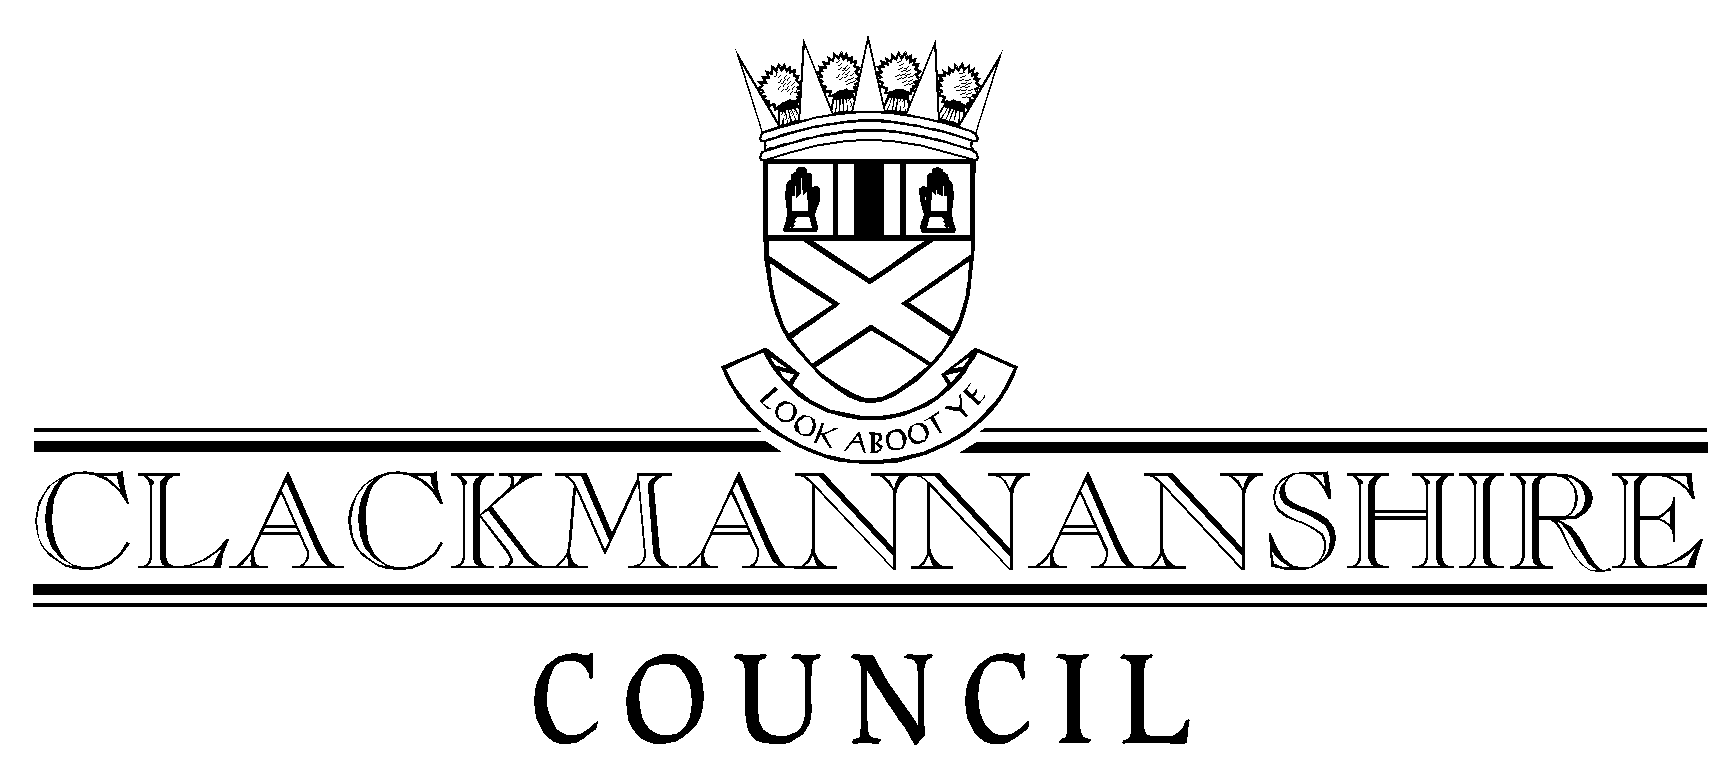 REPORT TO COUNCIL TO ACCOMPANY ALL REPORTS TO COUNCIL